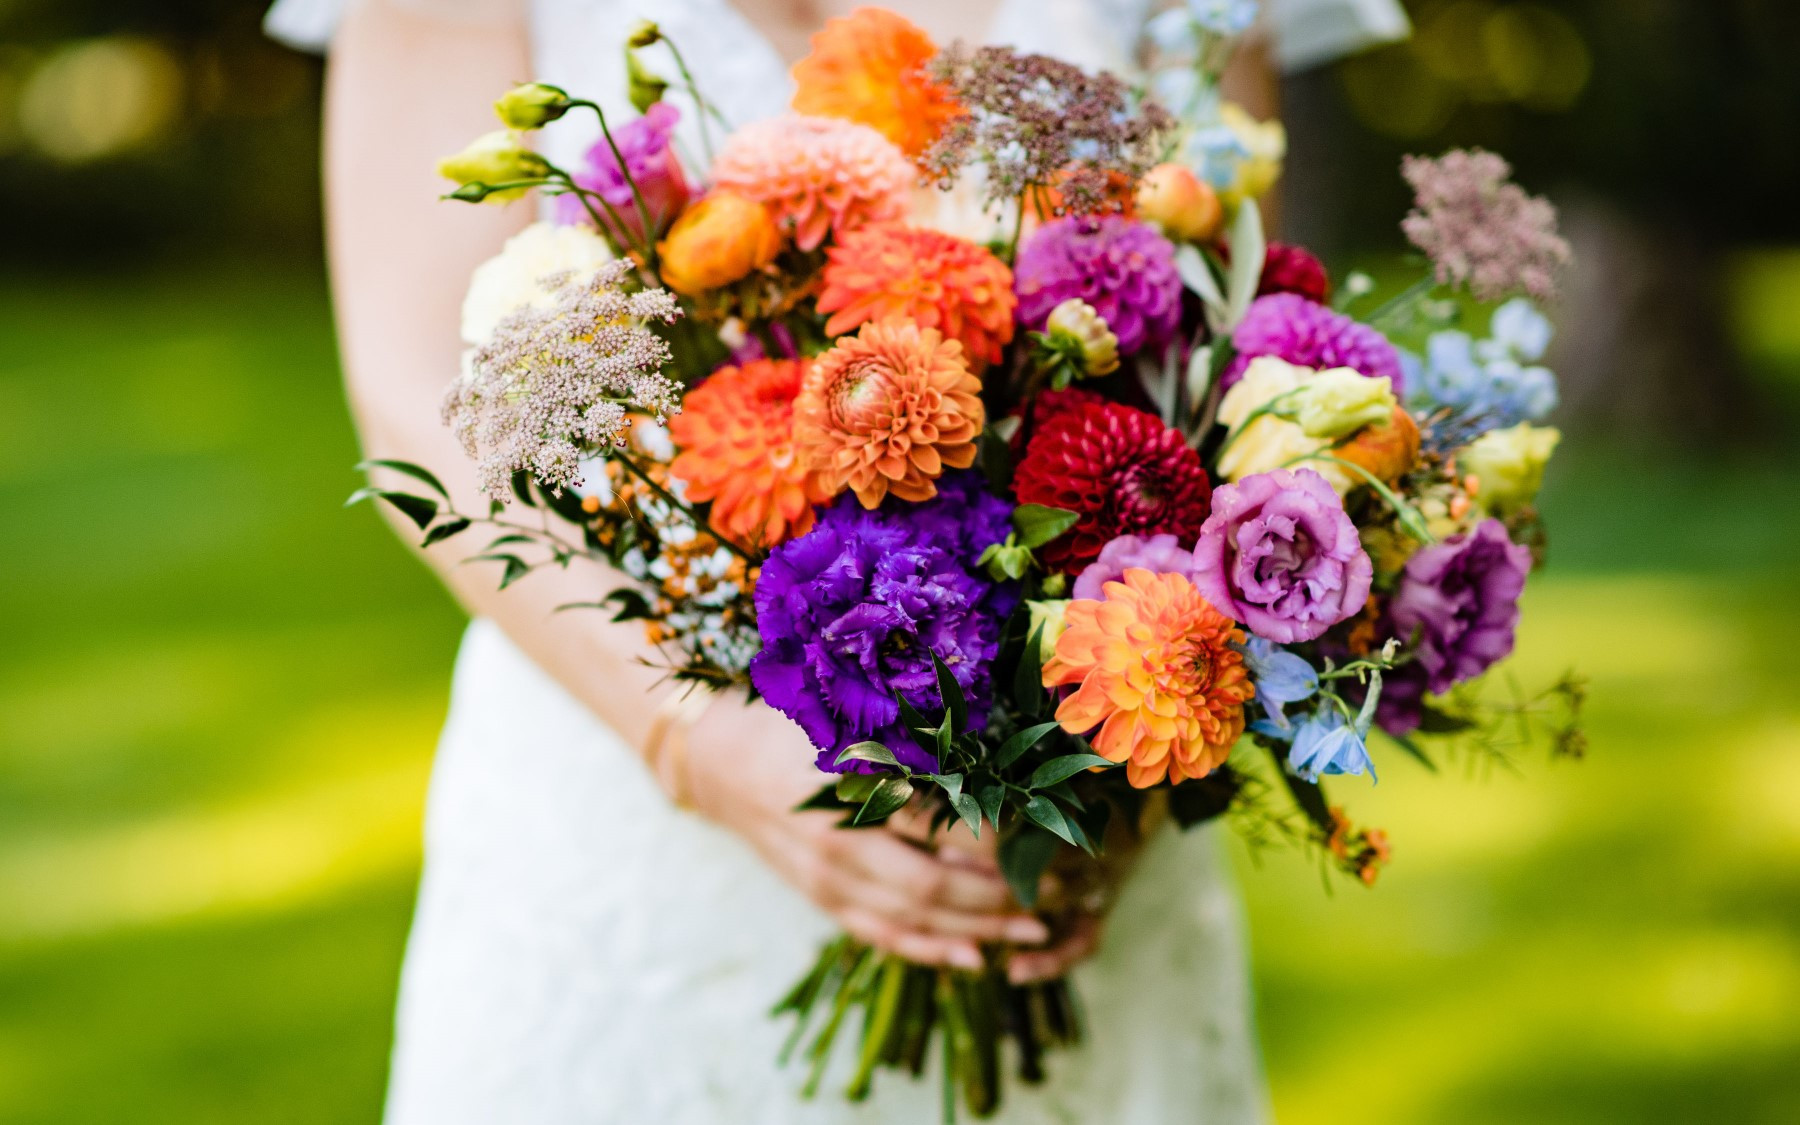 floral bouquet featuring red, orange, yellow, purple, blue, and white florals being held by bride.